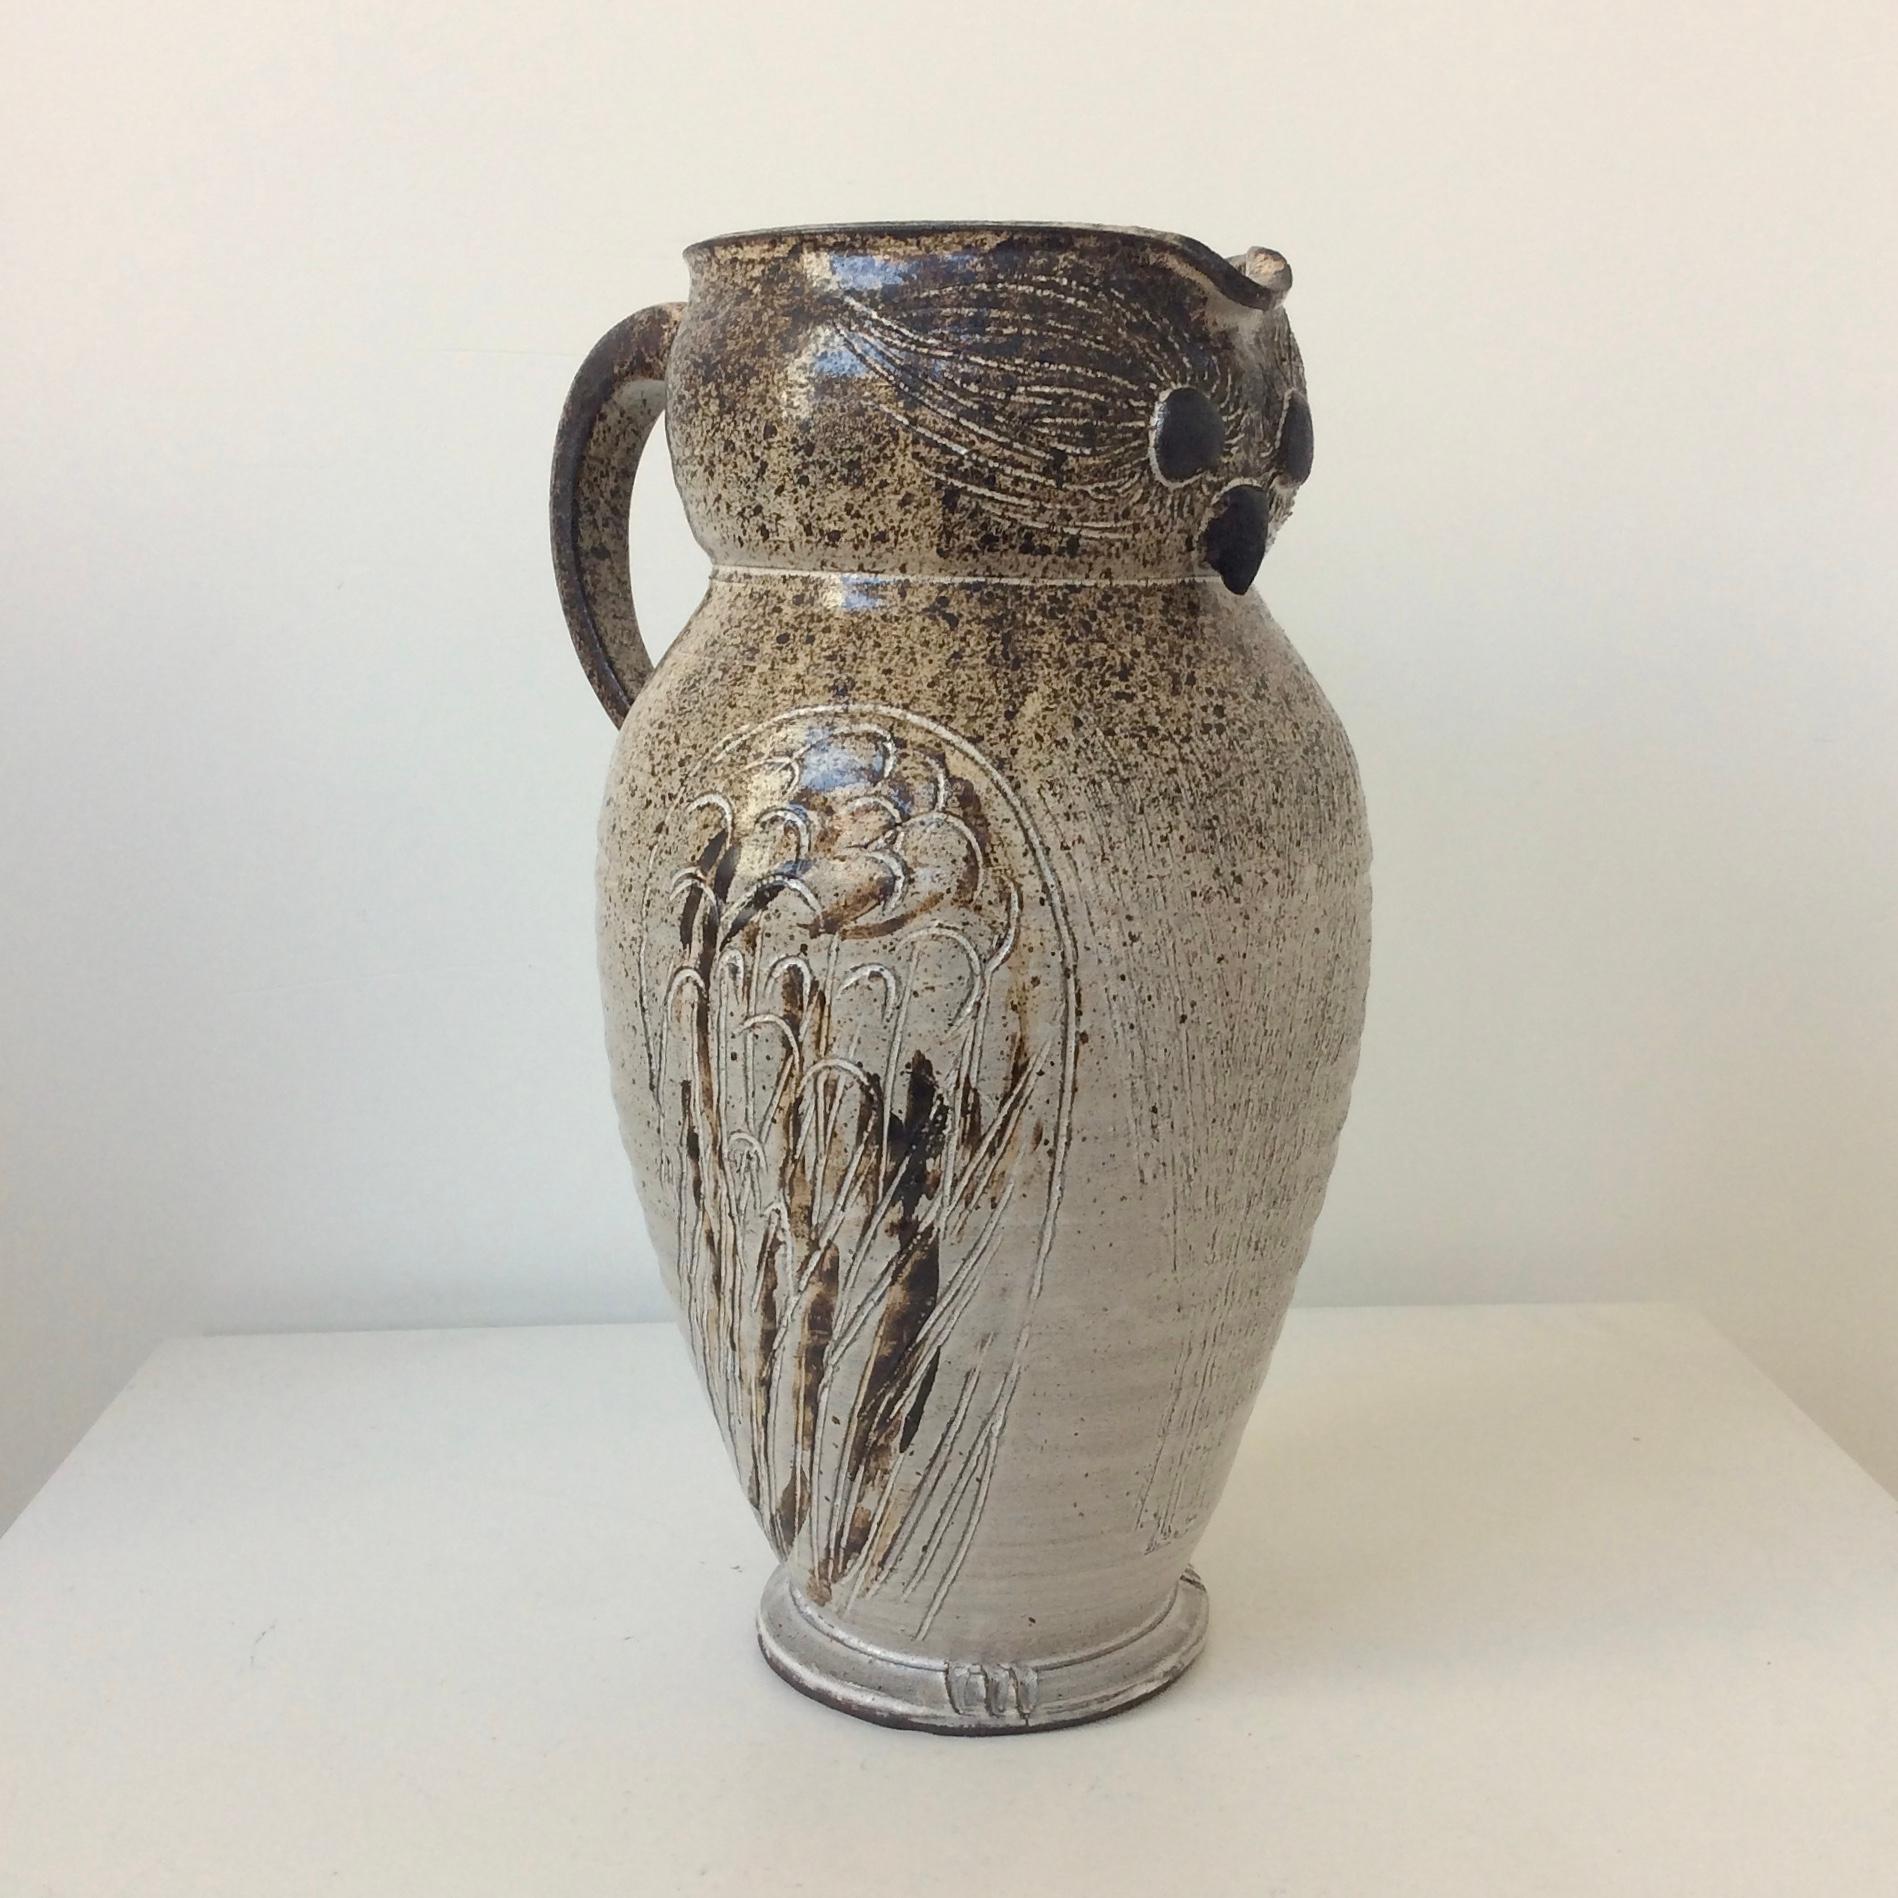 Zoomorphic owl jug, circa 1960.
Enameled sandsone.
Stamped: Handwork and illegible signature.
Dimensions: 29 cm H, 16 cm D, 20 cm W.
All purchases are covered by our Buyer Protection Guarantee.
This item can be returned within 7 days of